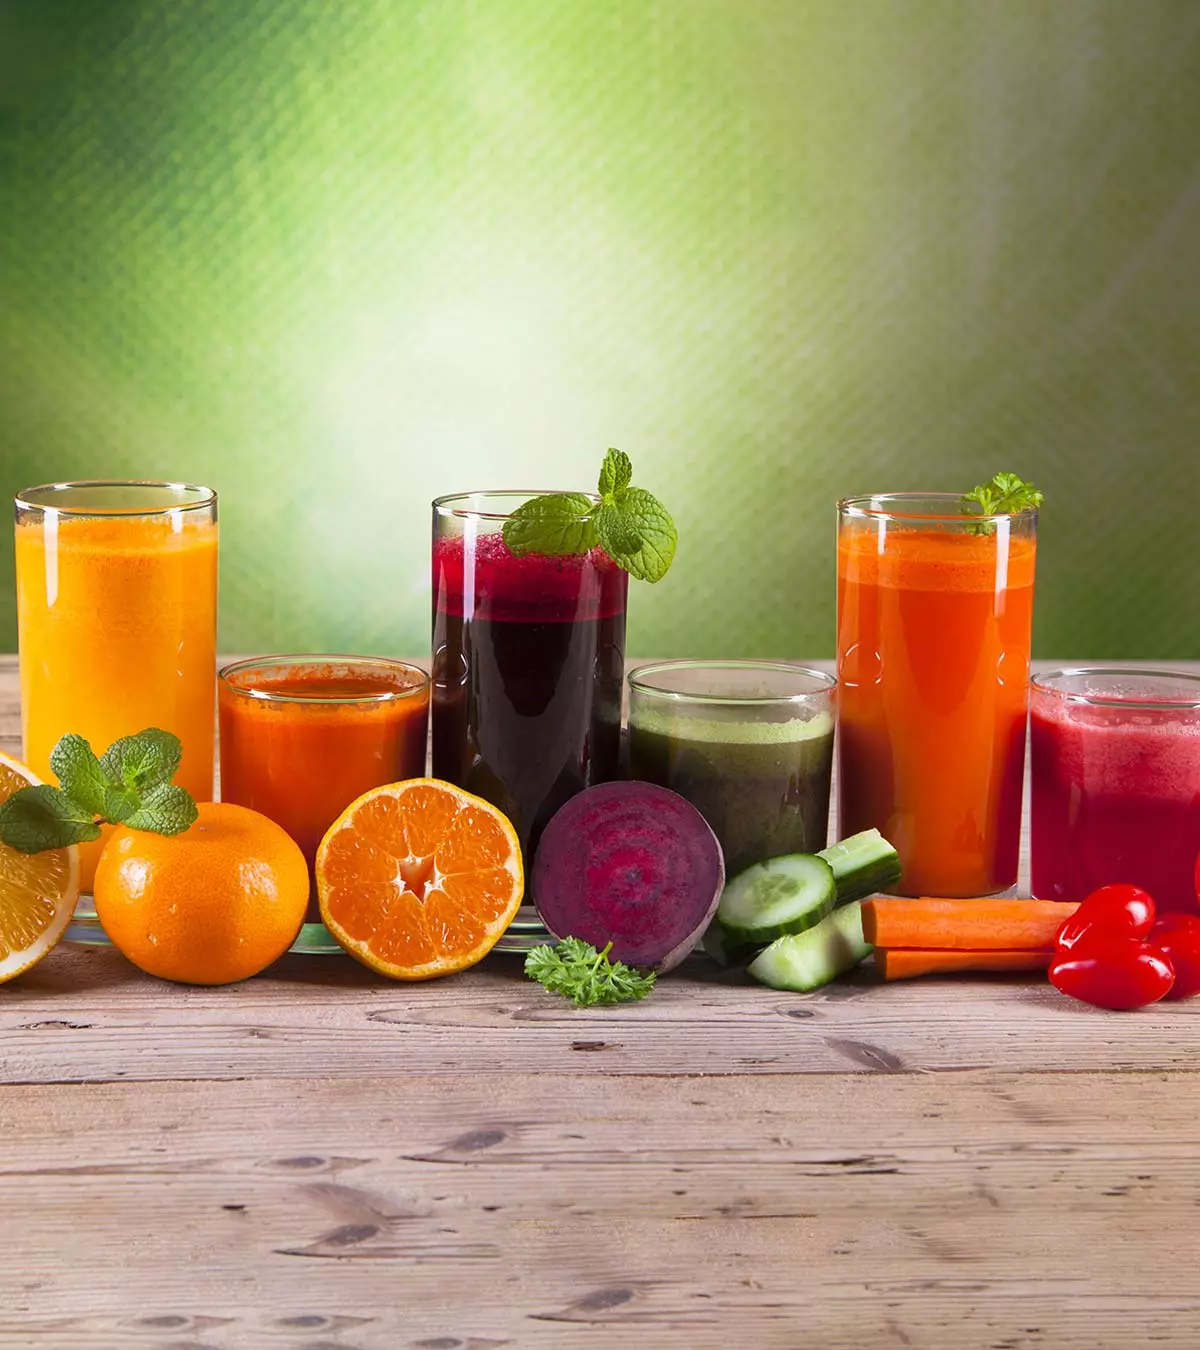 15 Best Fruit And Vegetable Juices For Your Baby